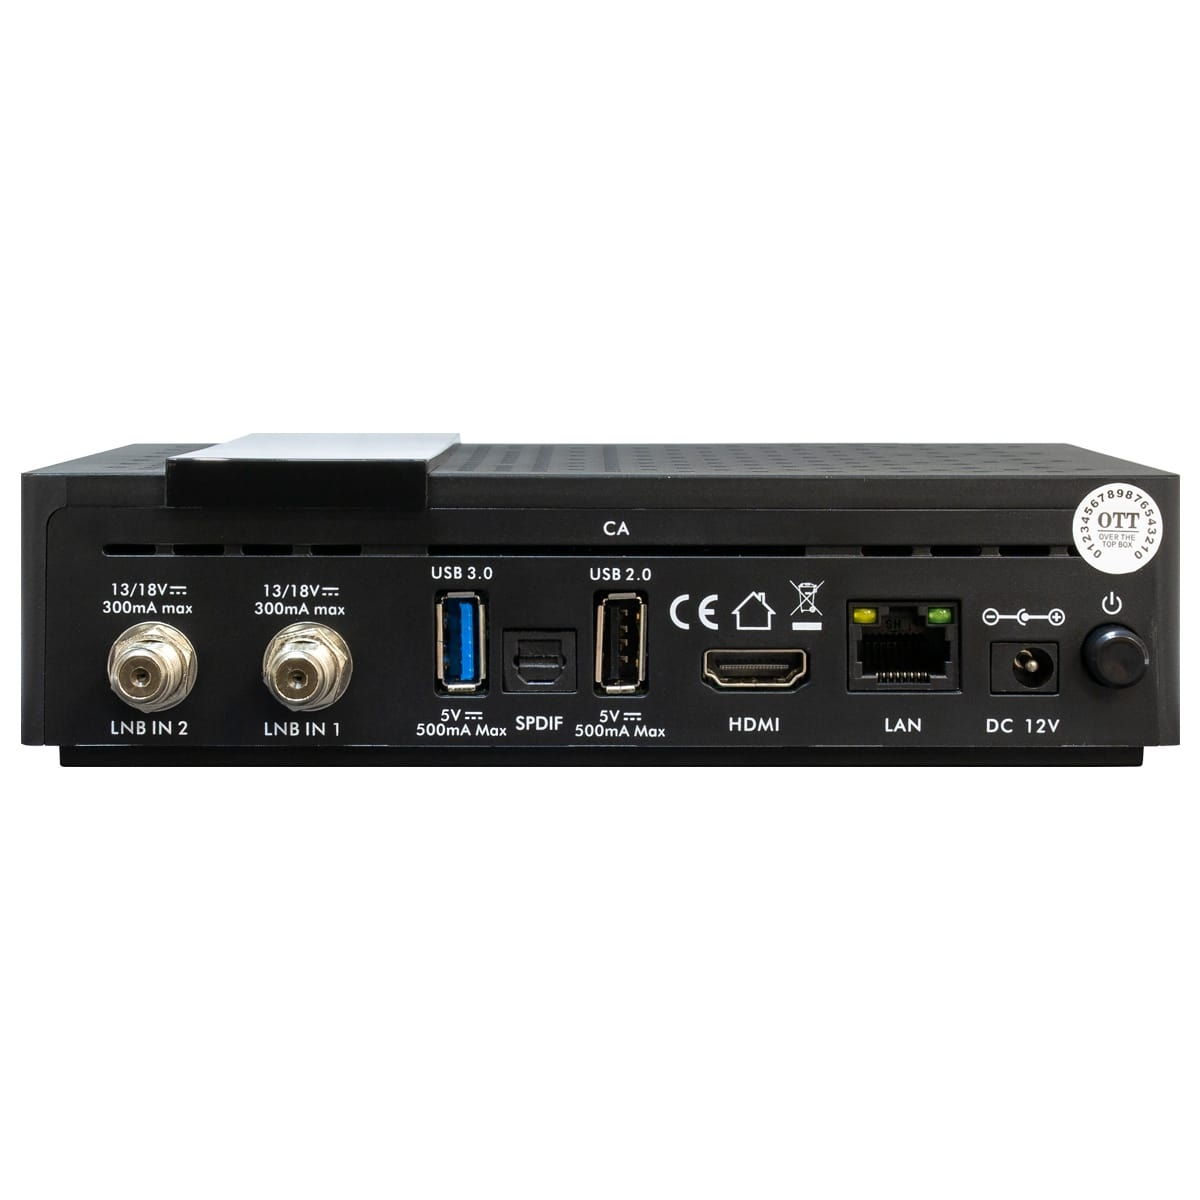 Tuner, Receiver IPBox AB-COM DVB-S2, Twin TWO Schwarz) (HDTV, Twin PVR-Funktion=optional, IP-Receiver